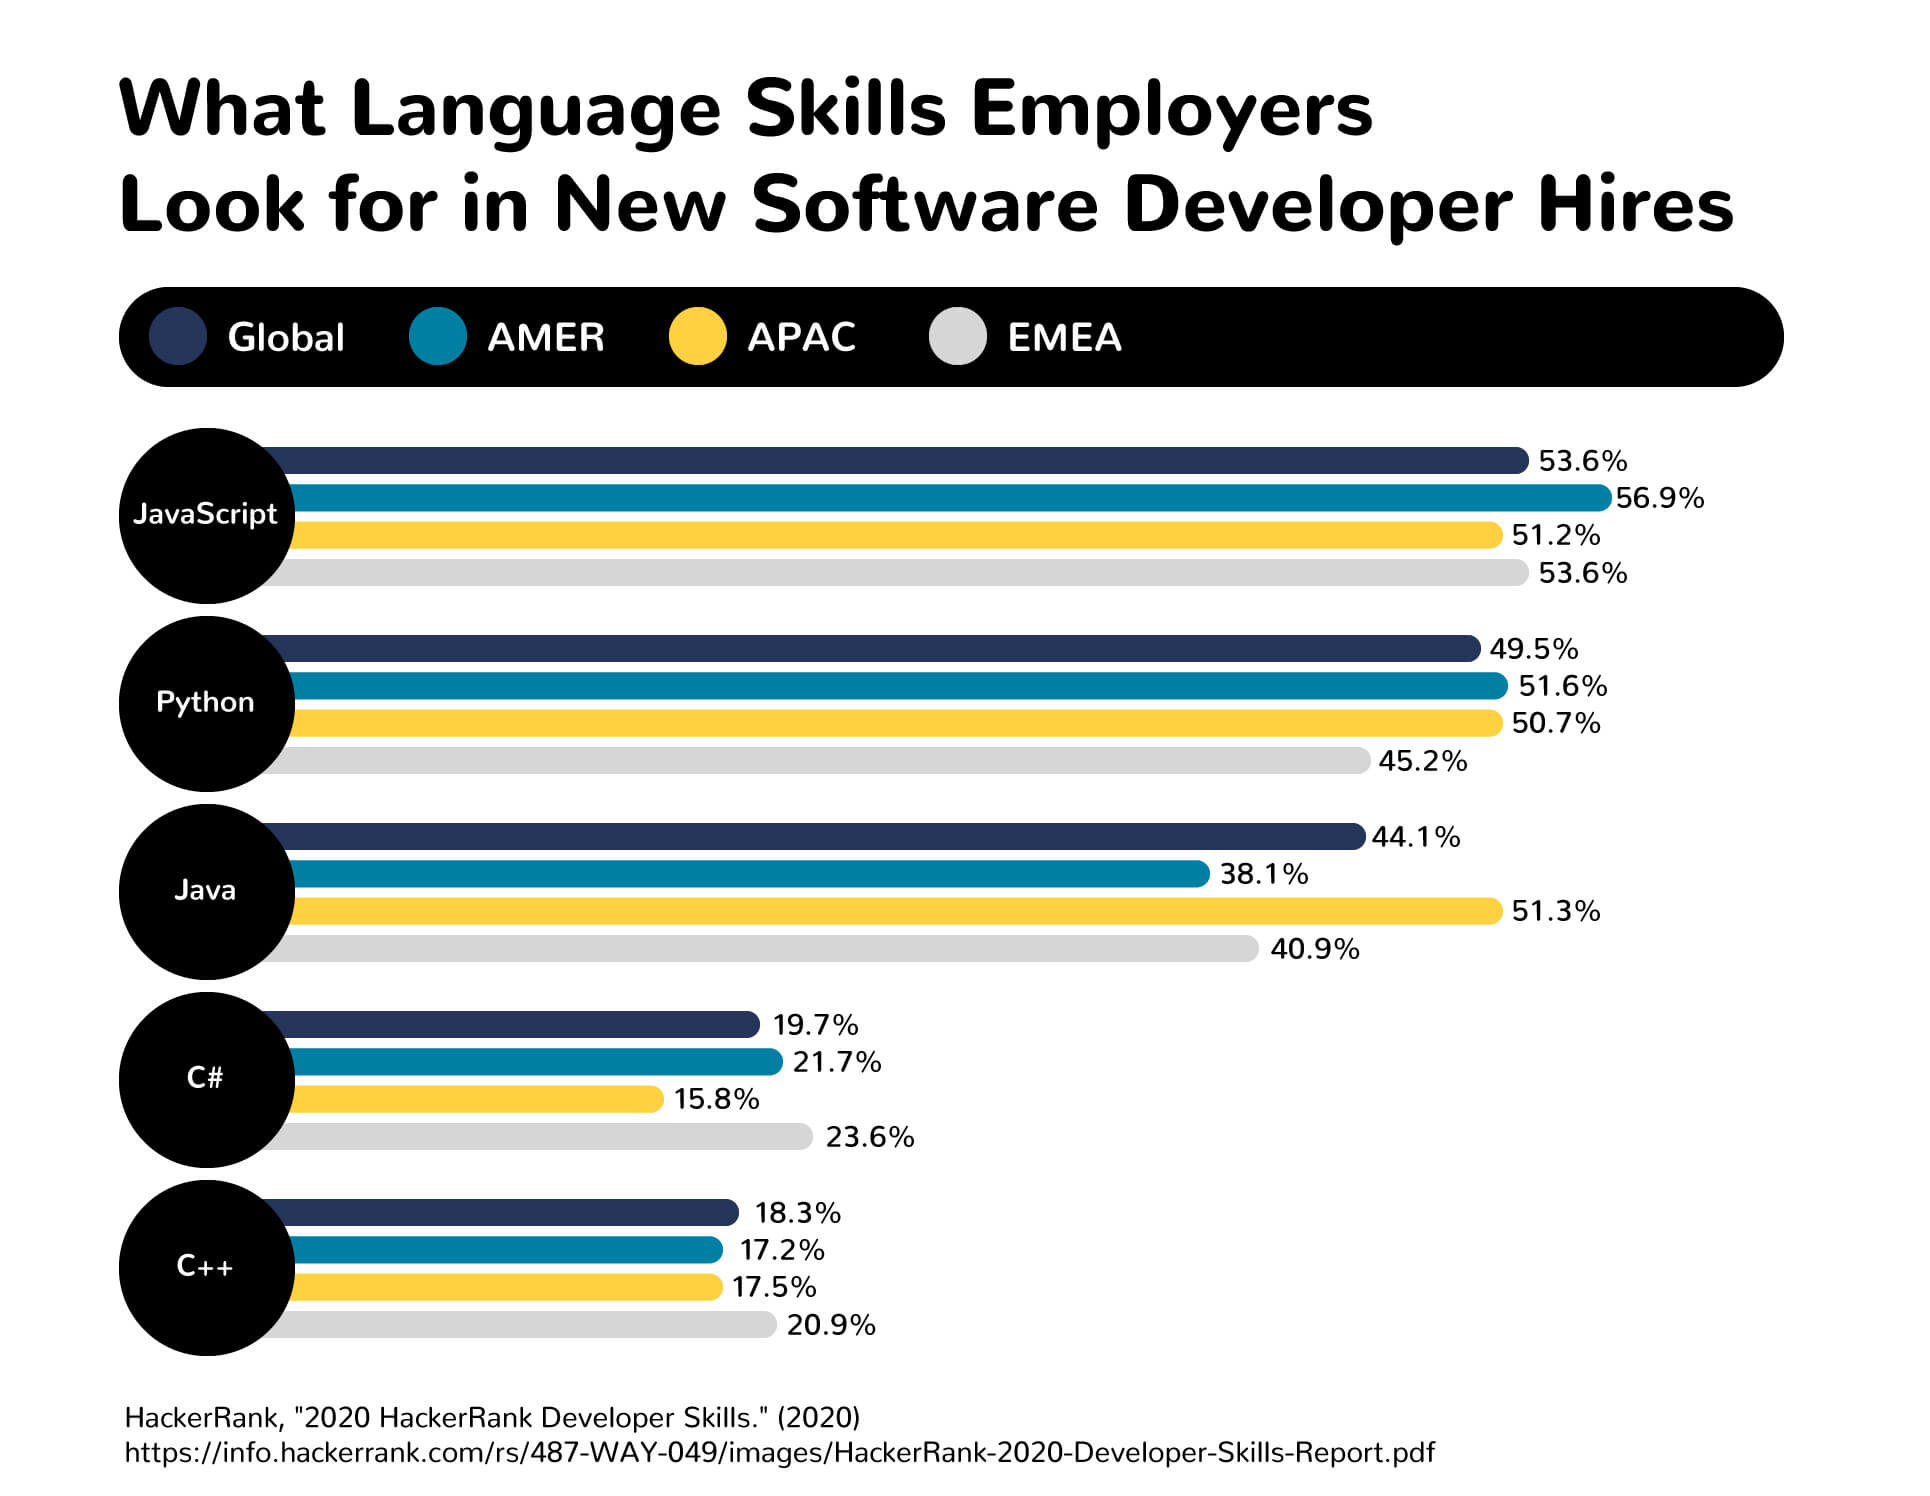 A chart showing what language skills employers look for in software developer hires